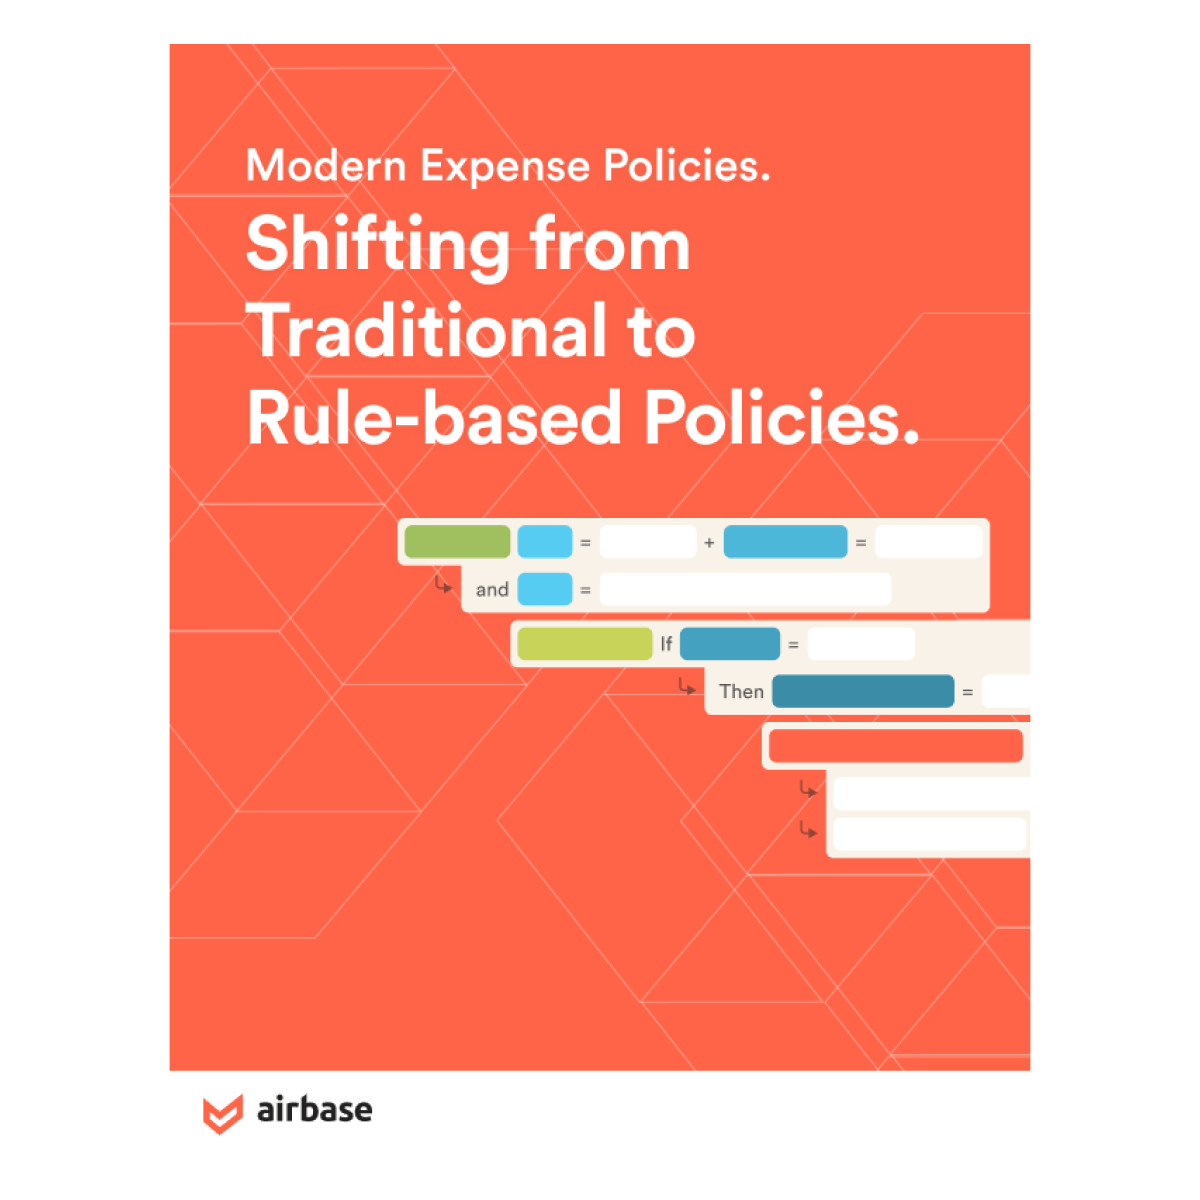 Your guide to creating rule-based expense policies.